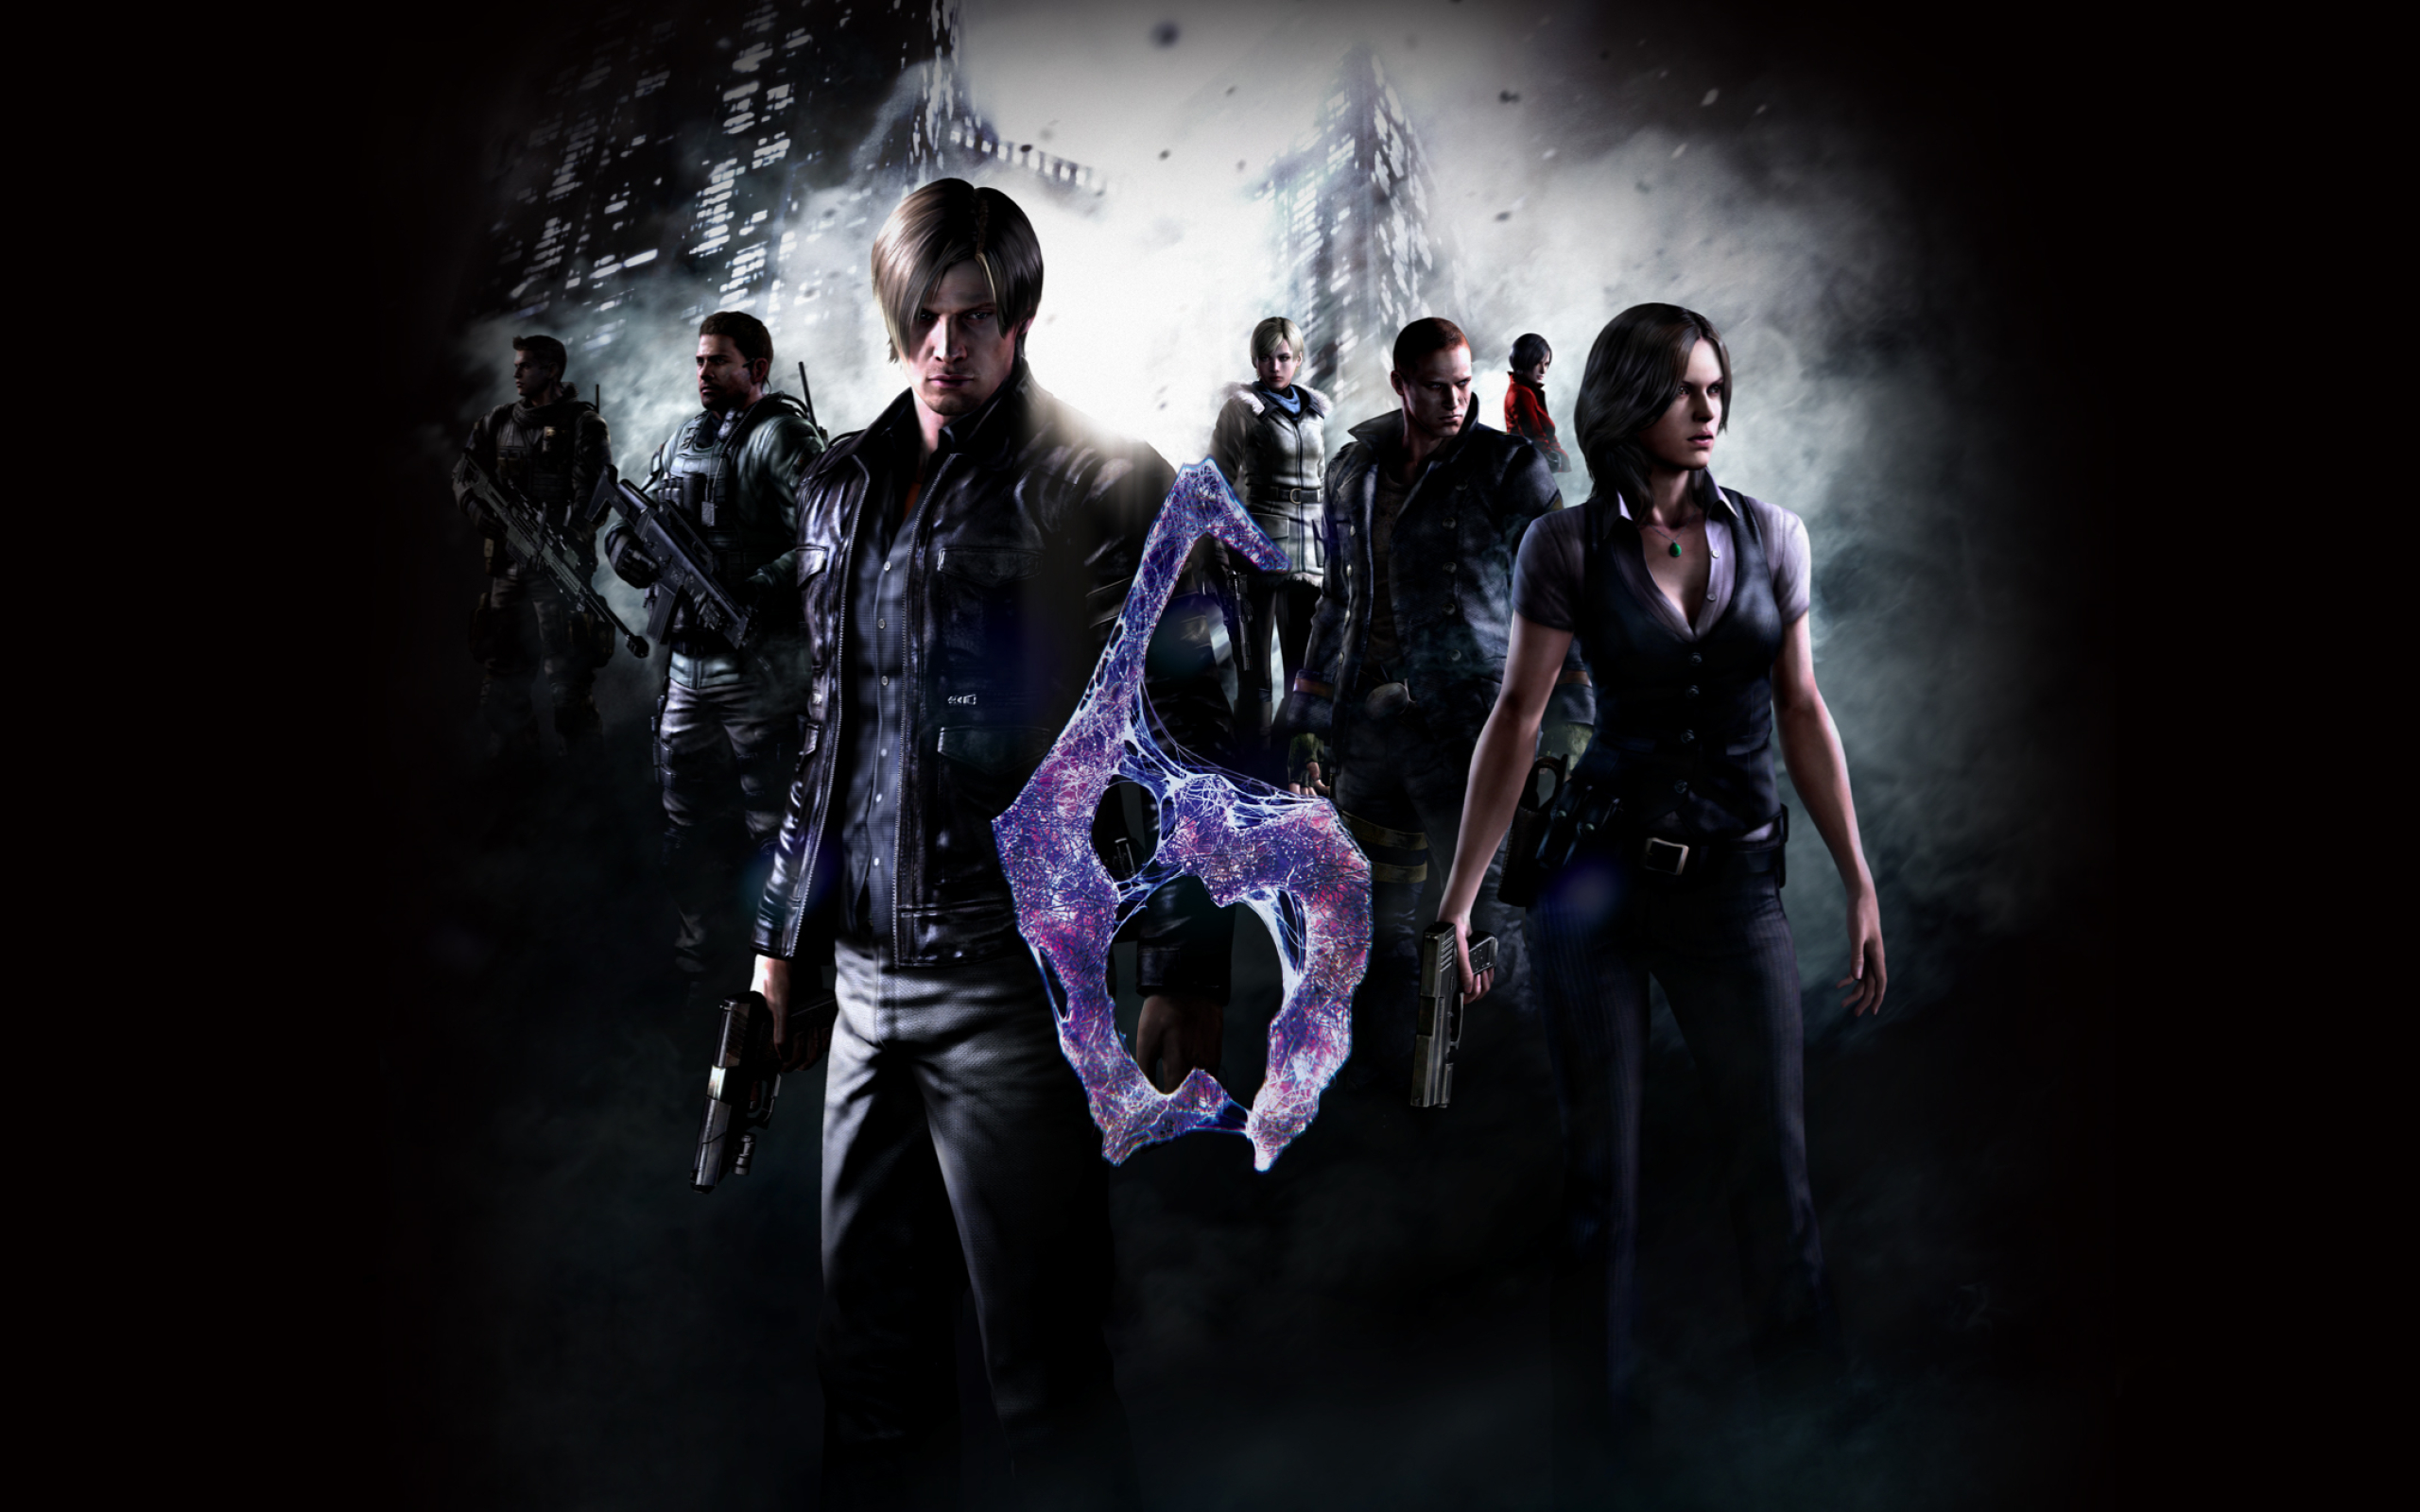 Initialize steam resident evil 6 фото 113